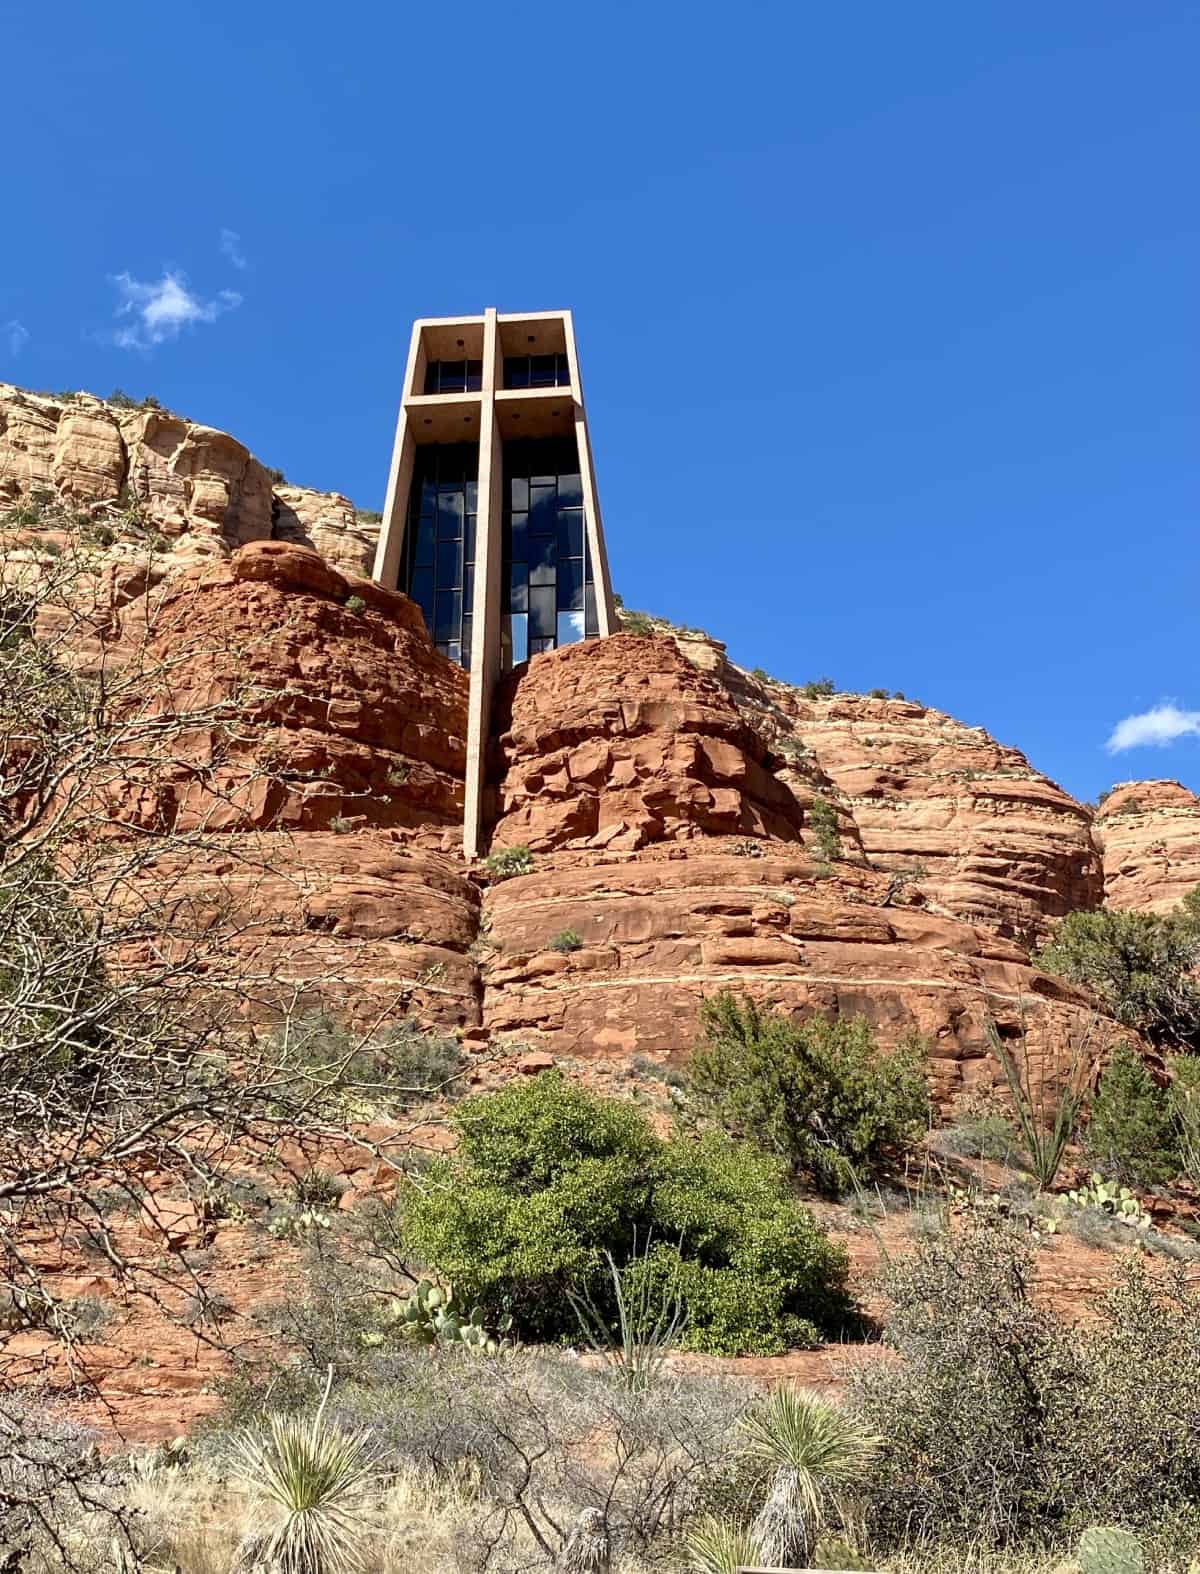 Visiting the Chapel of the Holy Cross in Sedona, Arizona | This unique church is an architectural gem built by a student of Frank Lloyd Wright, and an iconic view in Sedona's landscape | One Girl, Whole World